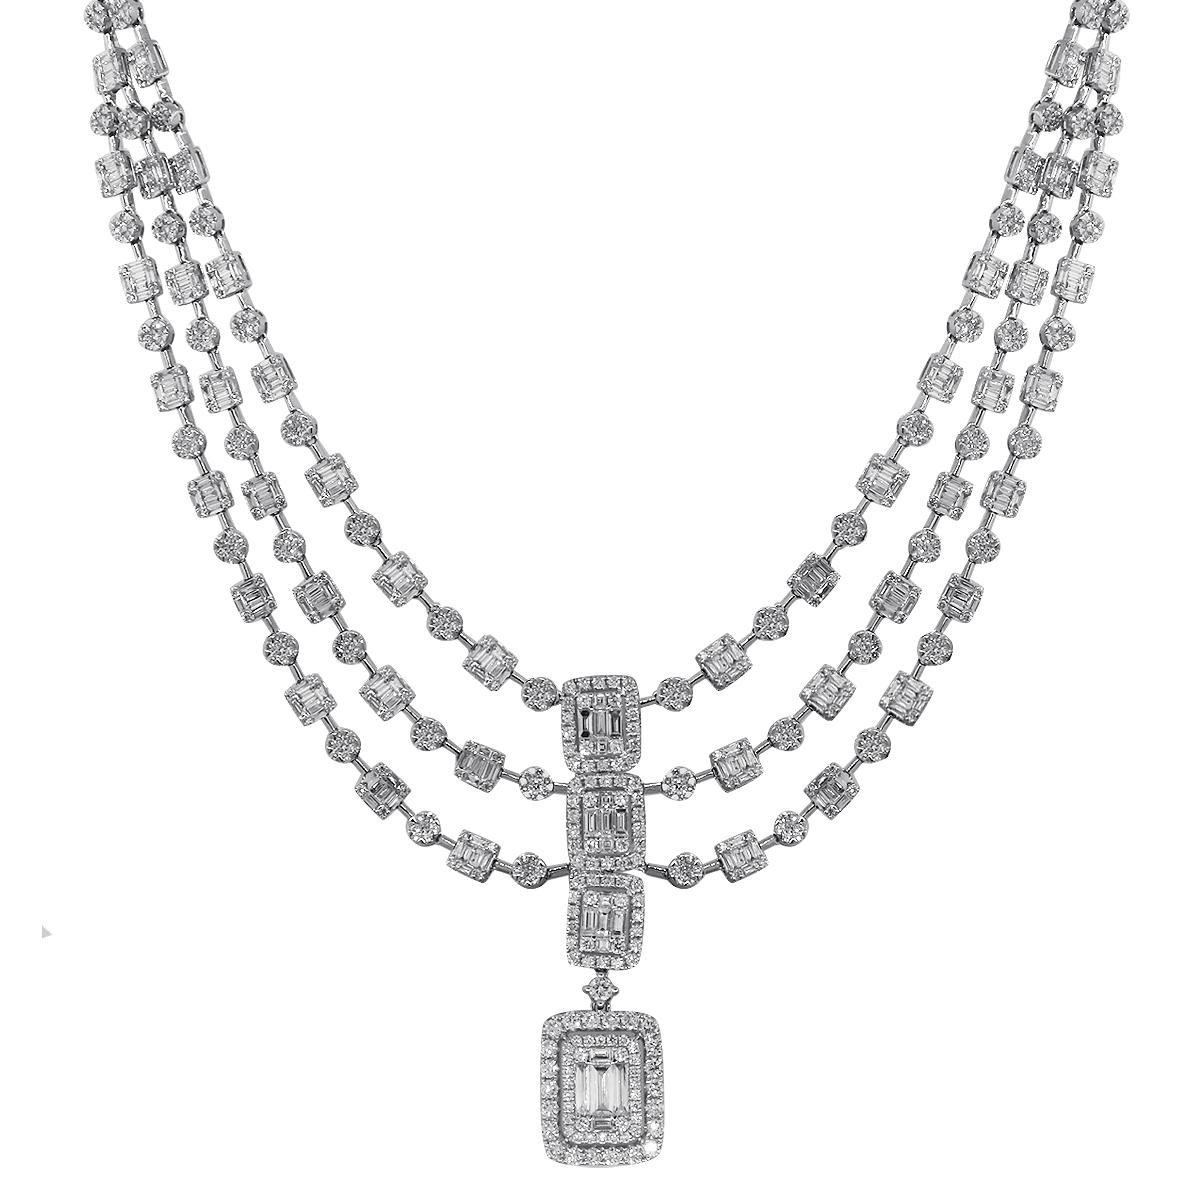 Material: 18k White Gold
Diamond Details: A total of 803 round brilliant diamonds that are approximately 10.50ctw
A total of 435 baguette cut diamonds that are approximately 9.29ctw
Diamonds are G/H in color and VS in clarity.
Measurements: Necklace